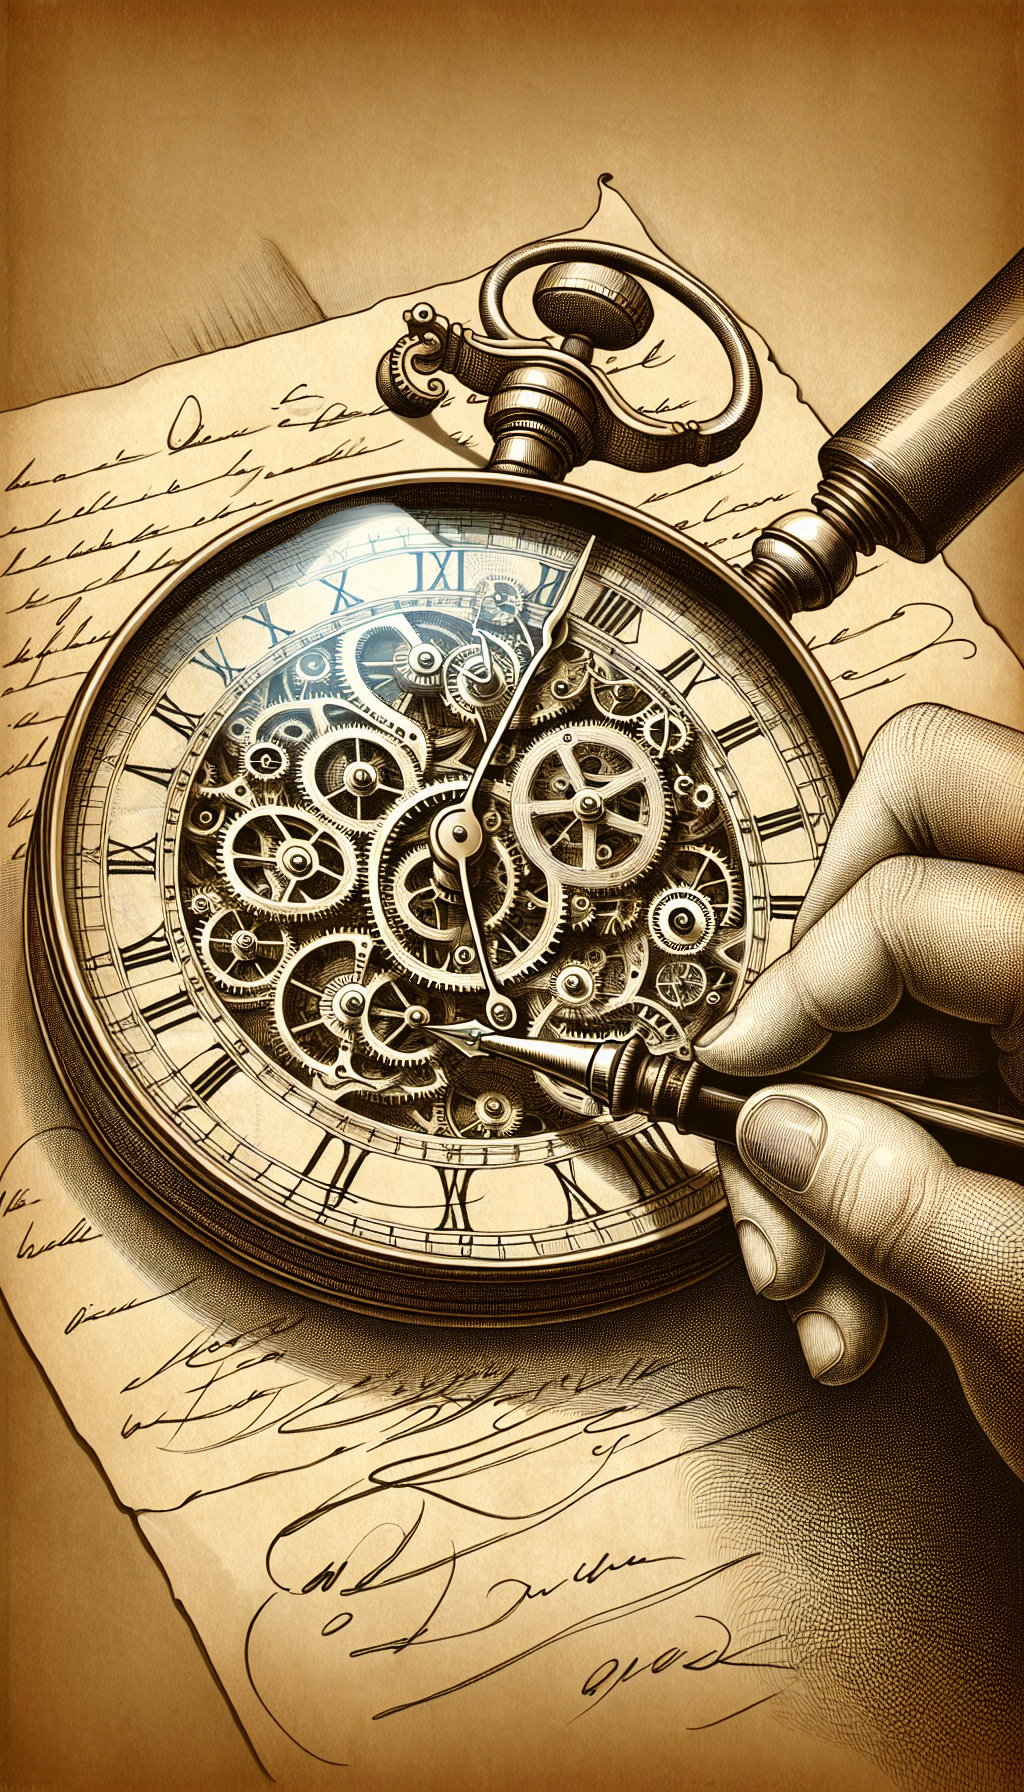 An illustration of an ornate antique clock, its face transparent revealing its intricate gears, each gear engraved with unique, distinctive maker's marks. The clock's hands forge a pen that signs a parchment scroll emblematic of a signature. A magnifying glass looms above, highlighting the artistry of the etched symbols, emphasizing the theme of identification and authentication.